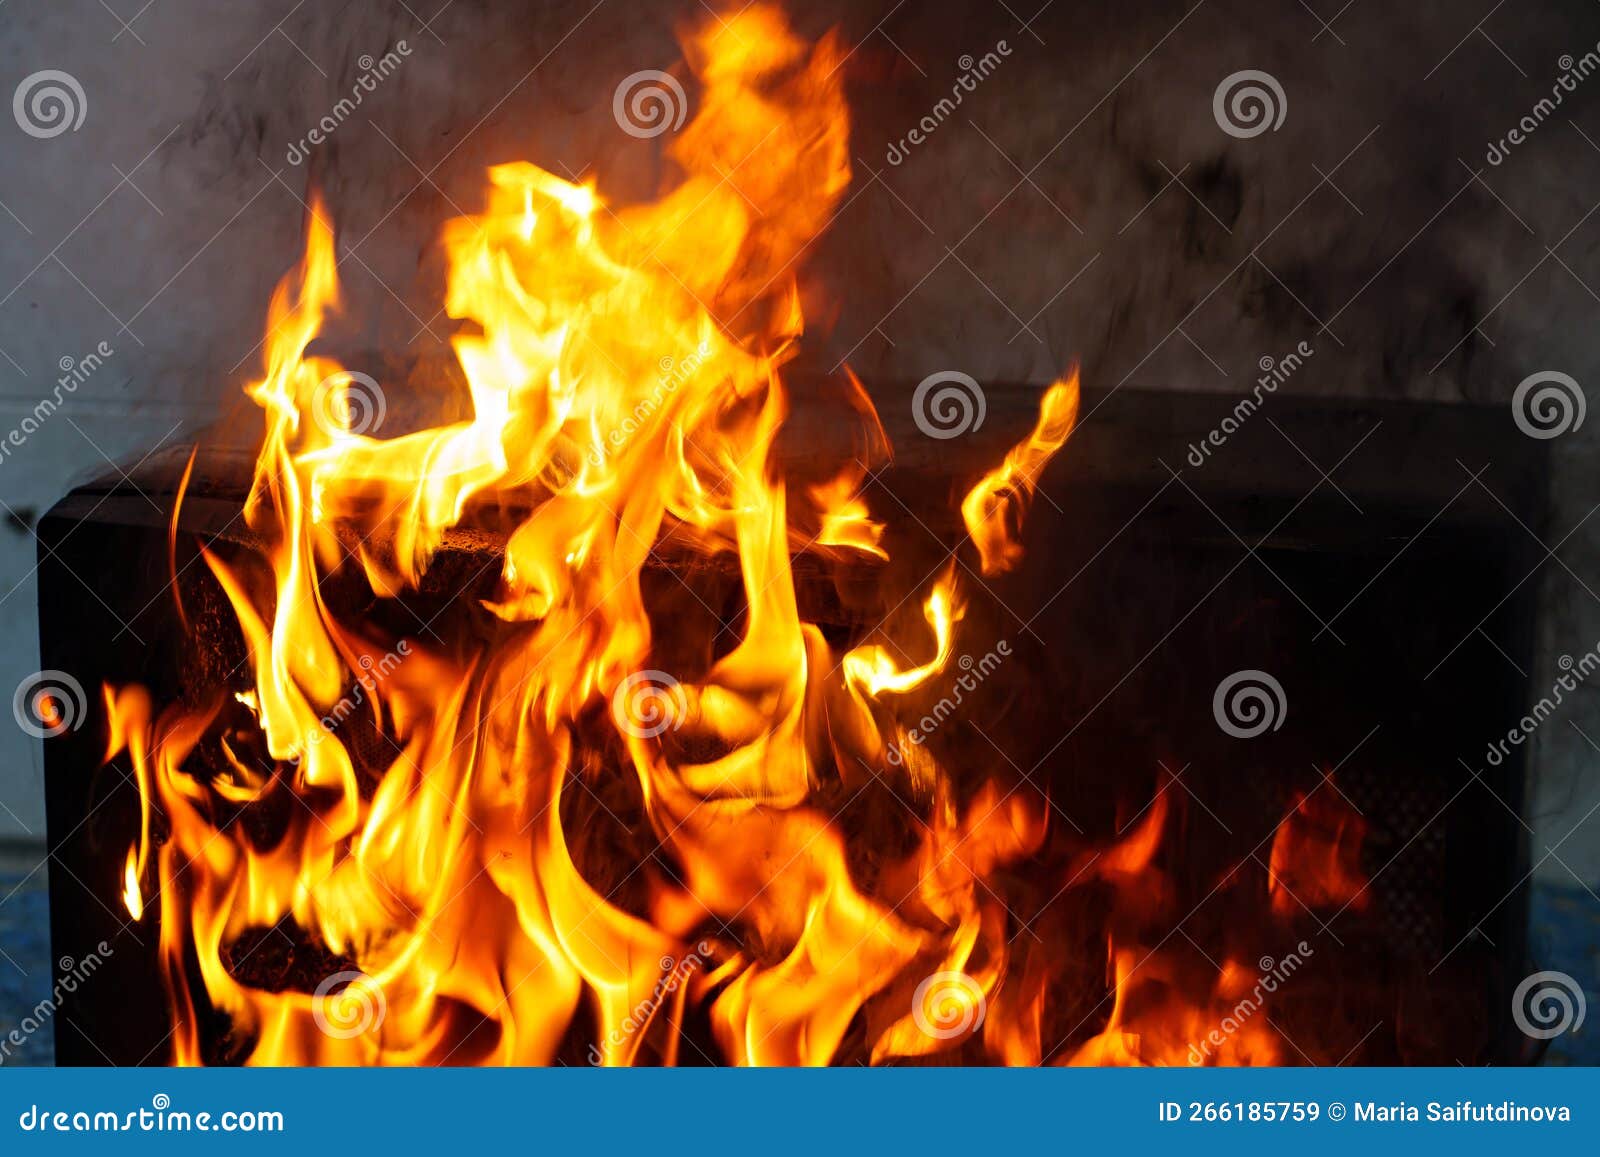 Microwave Oven on Fire. the Concept of Fire in the Kitchen. Stock Image -  Image of hazards, safety: 266185759